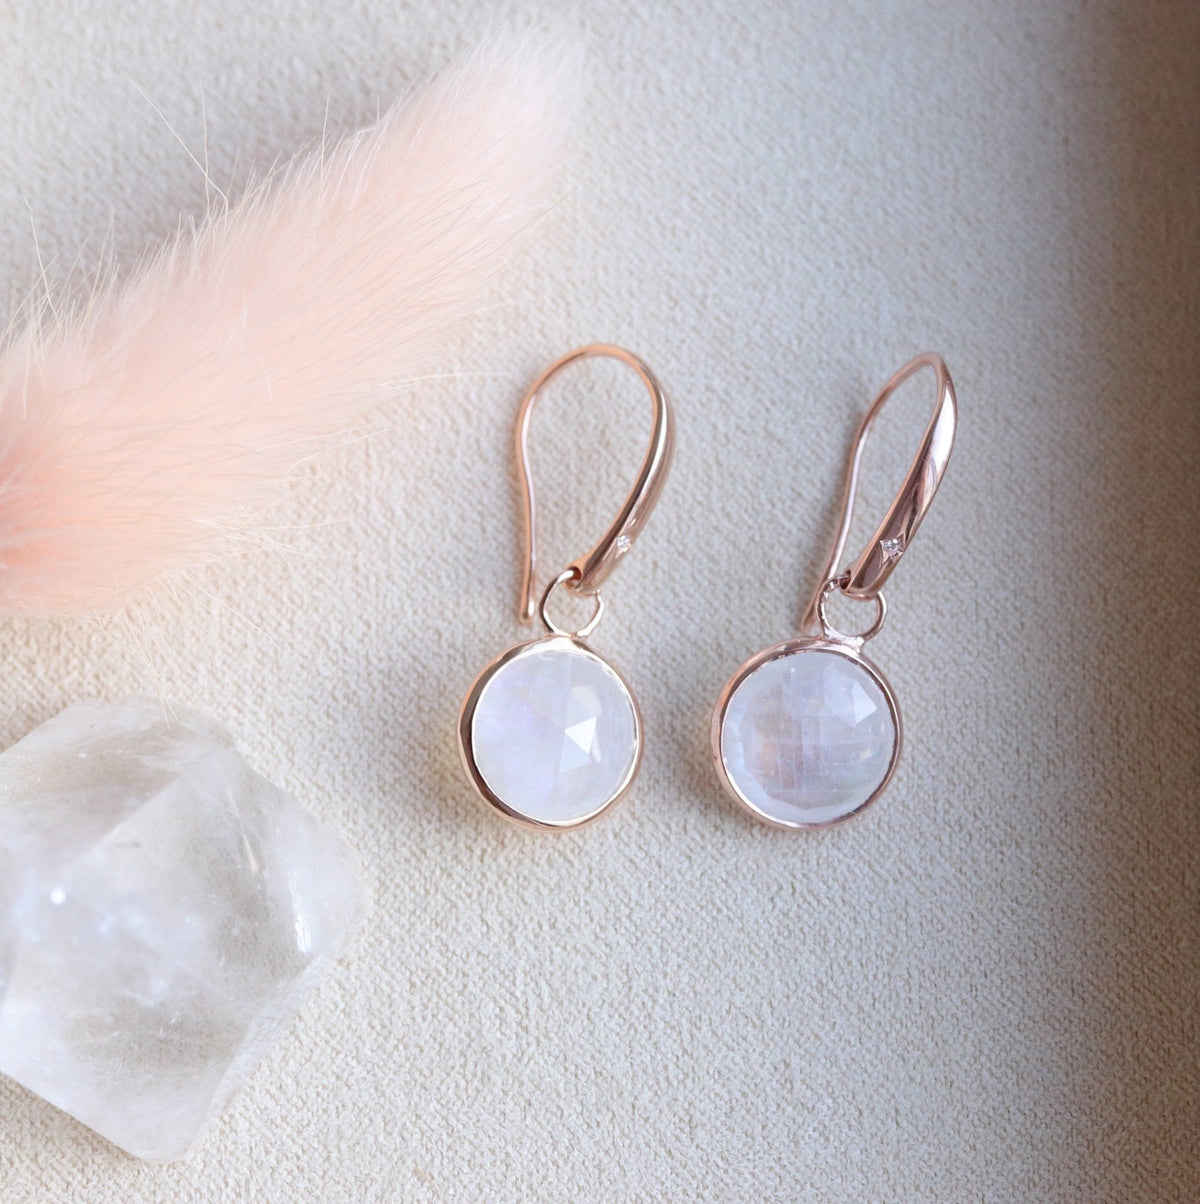 LEGACY DROP EARRINGS - RAINBOW MOONSTONE, CUBIC ZIRCONIA &amp; ROSE GOLD - SO PRETTY CARA COTTER